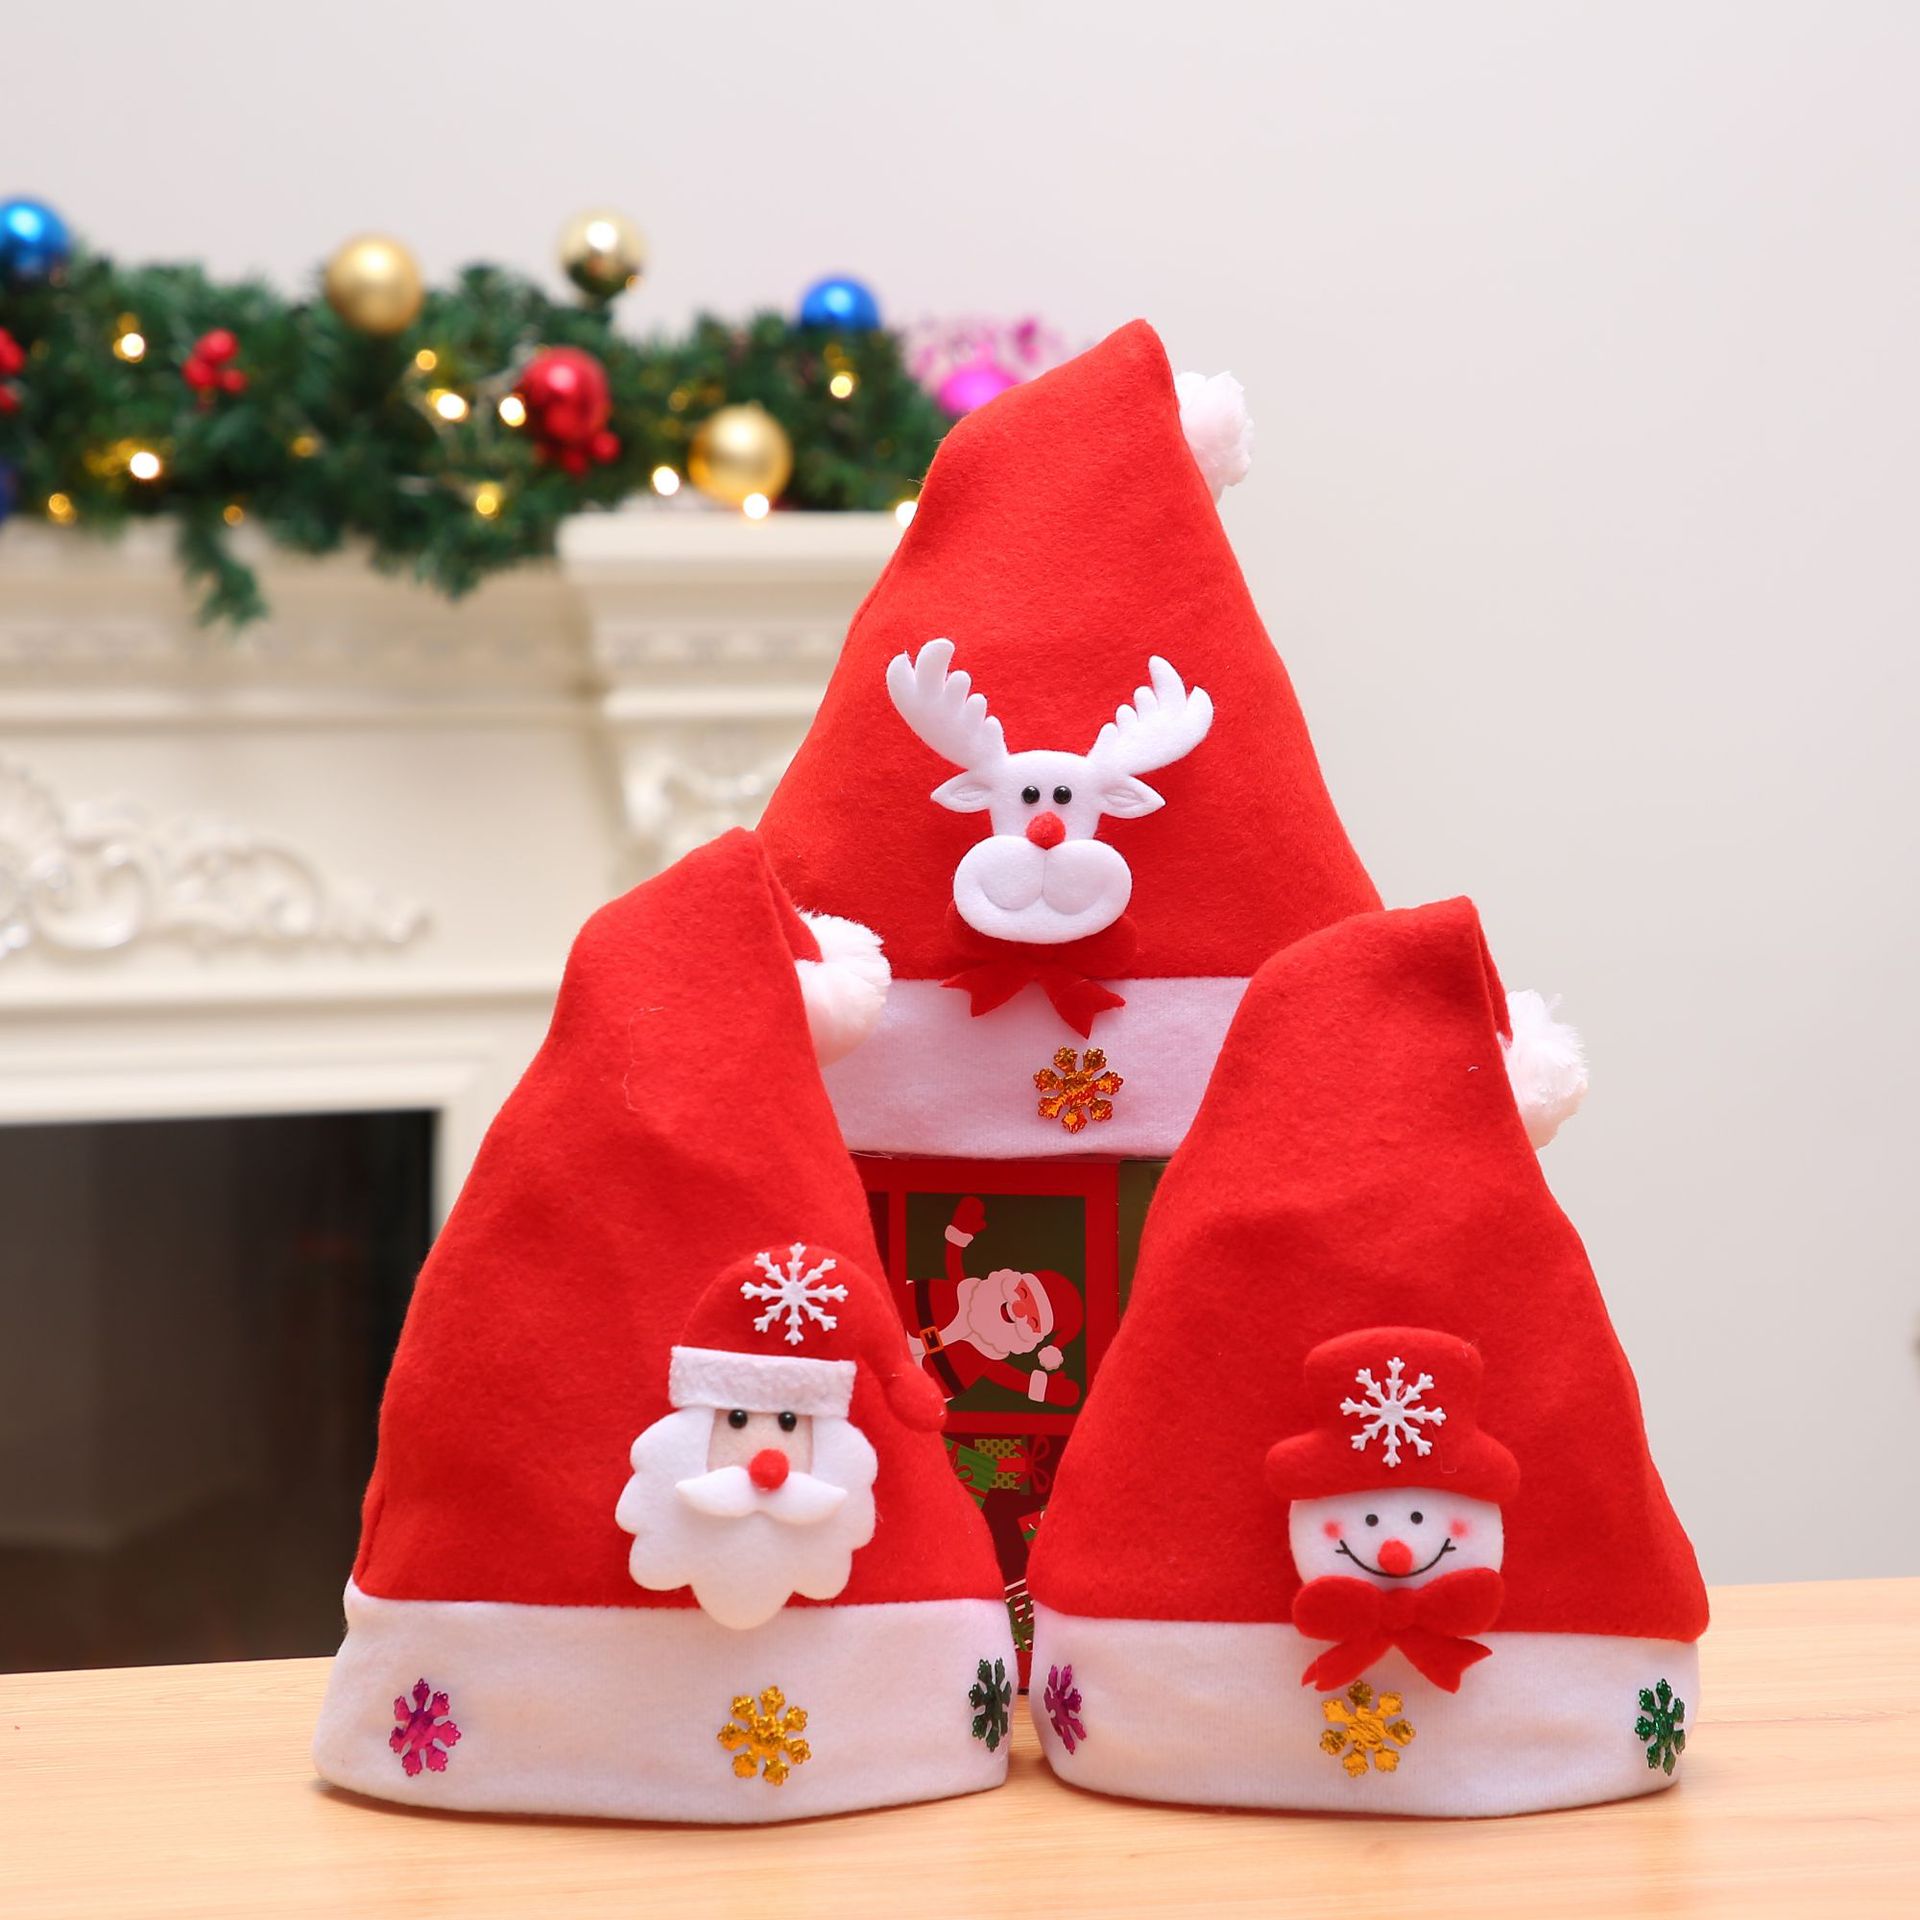 Christmas Hats Red Deer Snow Santa Hats With White Cuffs